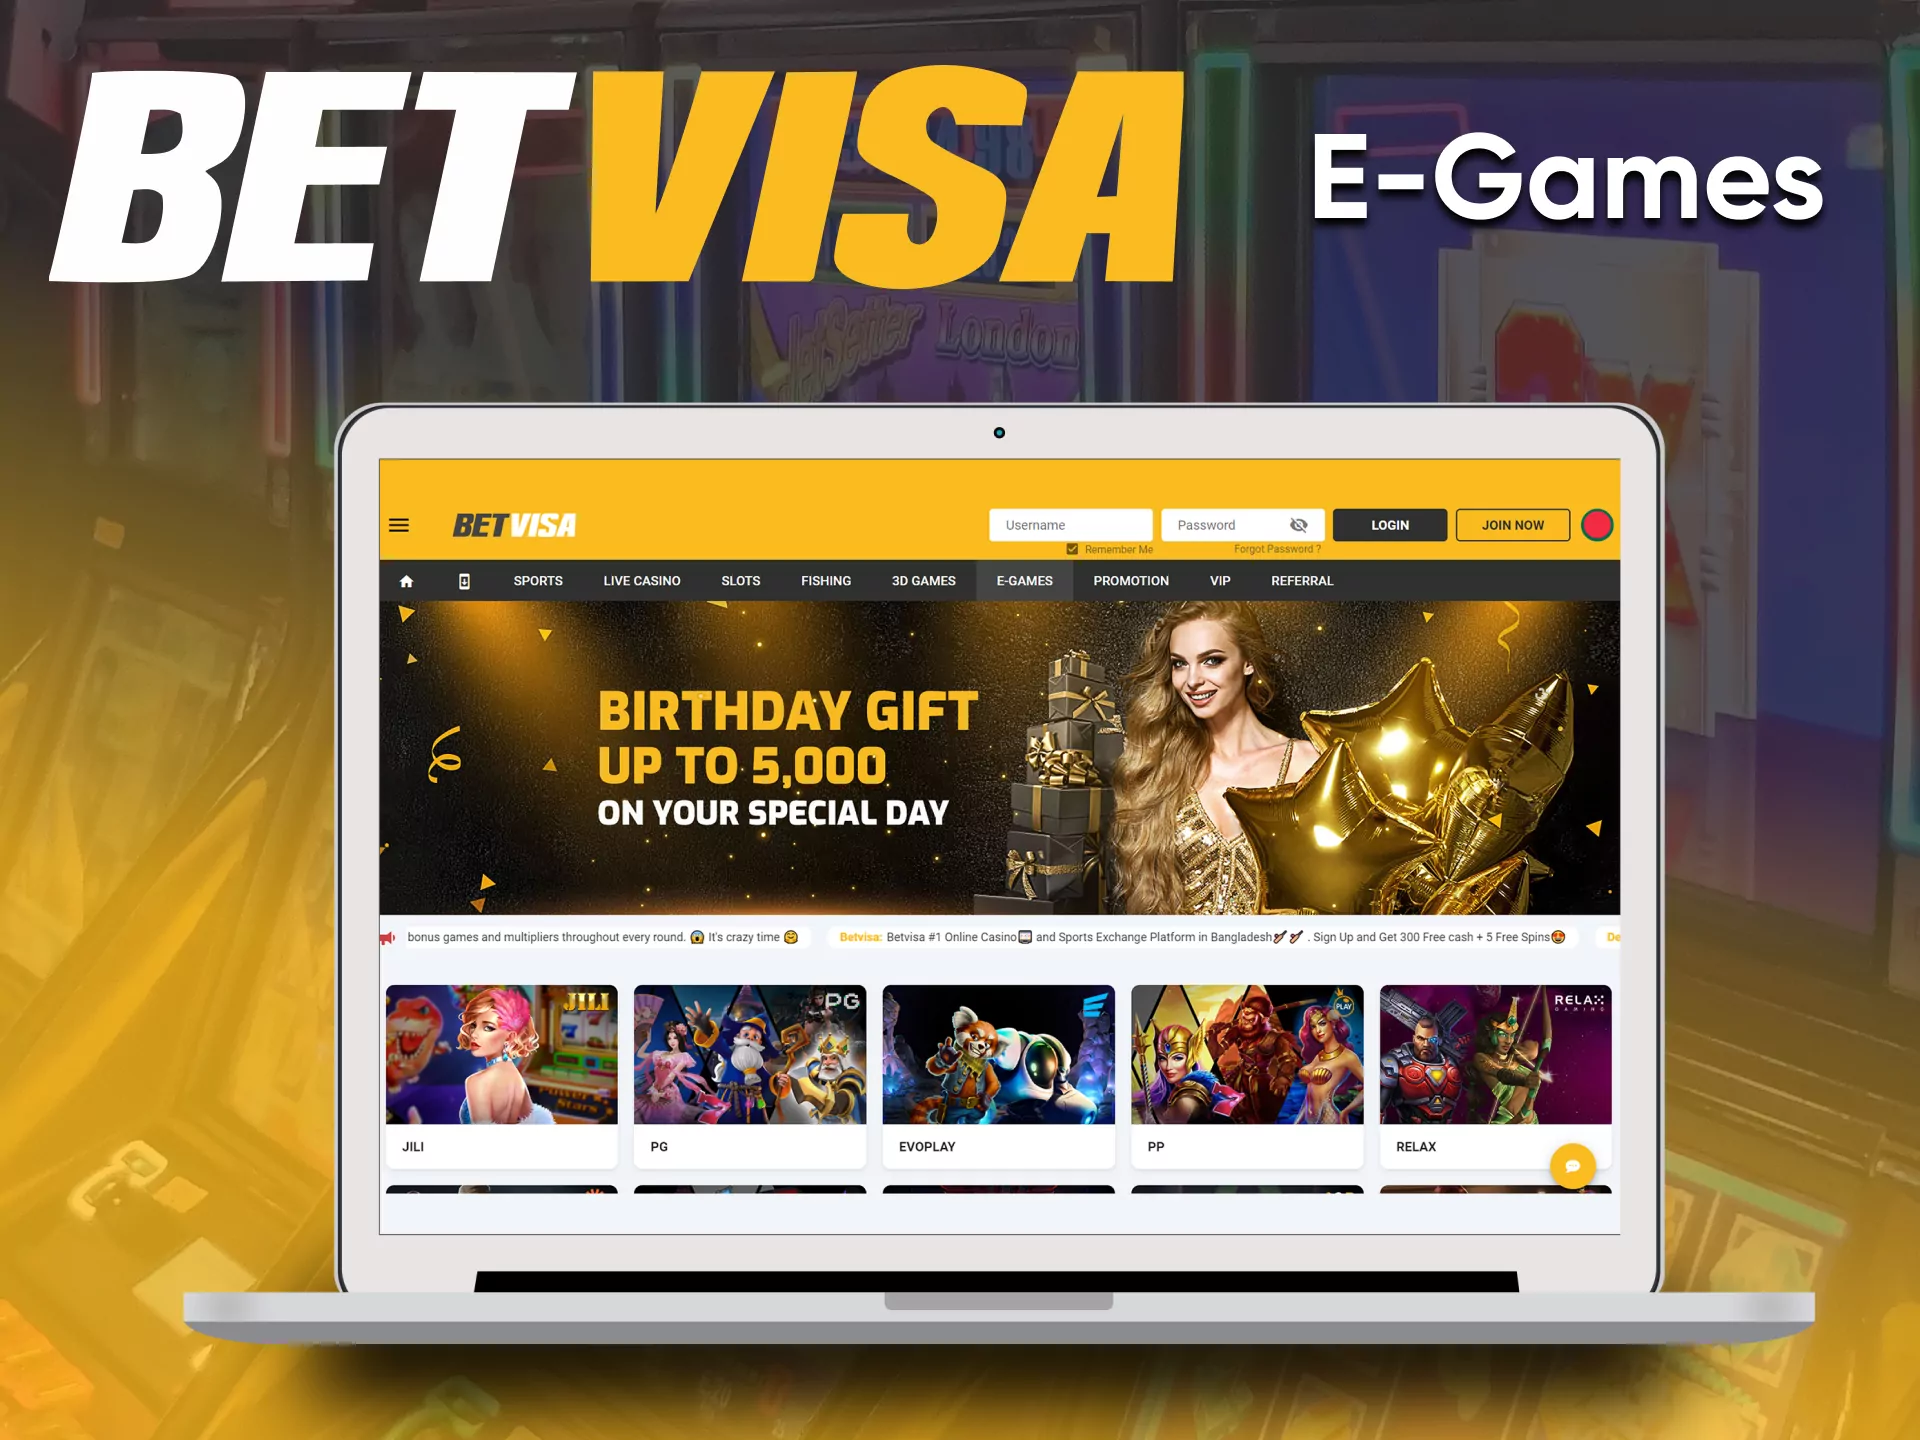 Play E-games in the casino section of BetVisa.